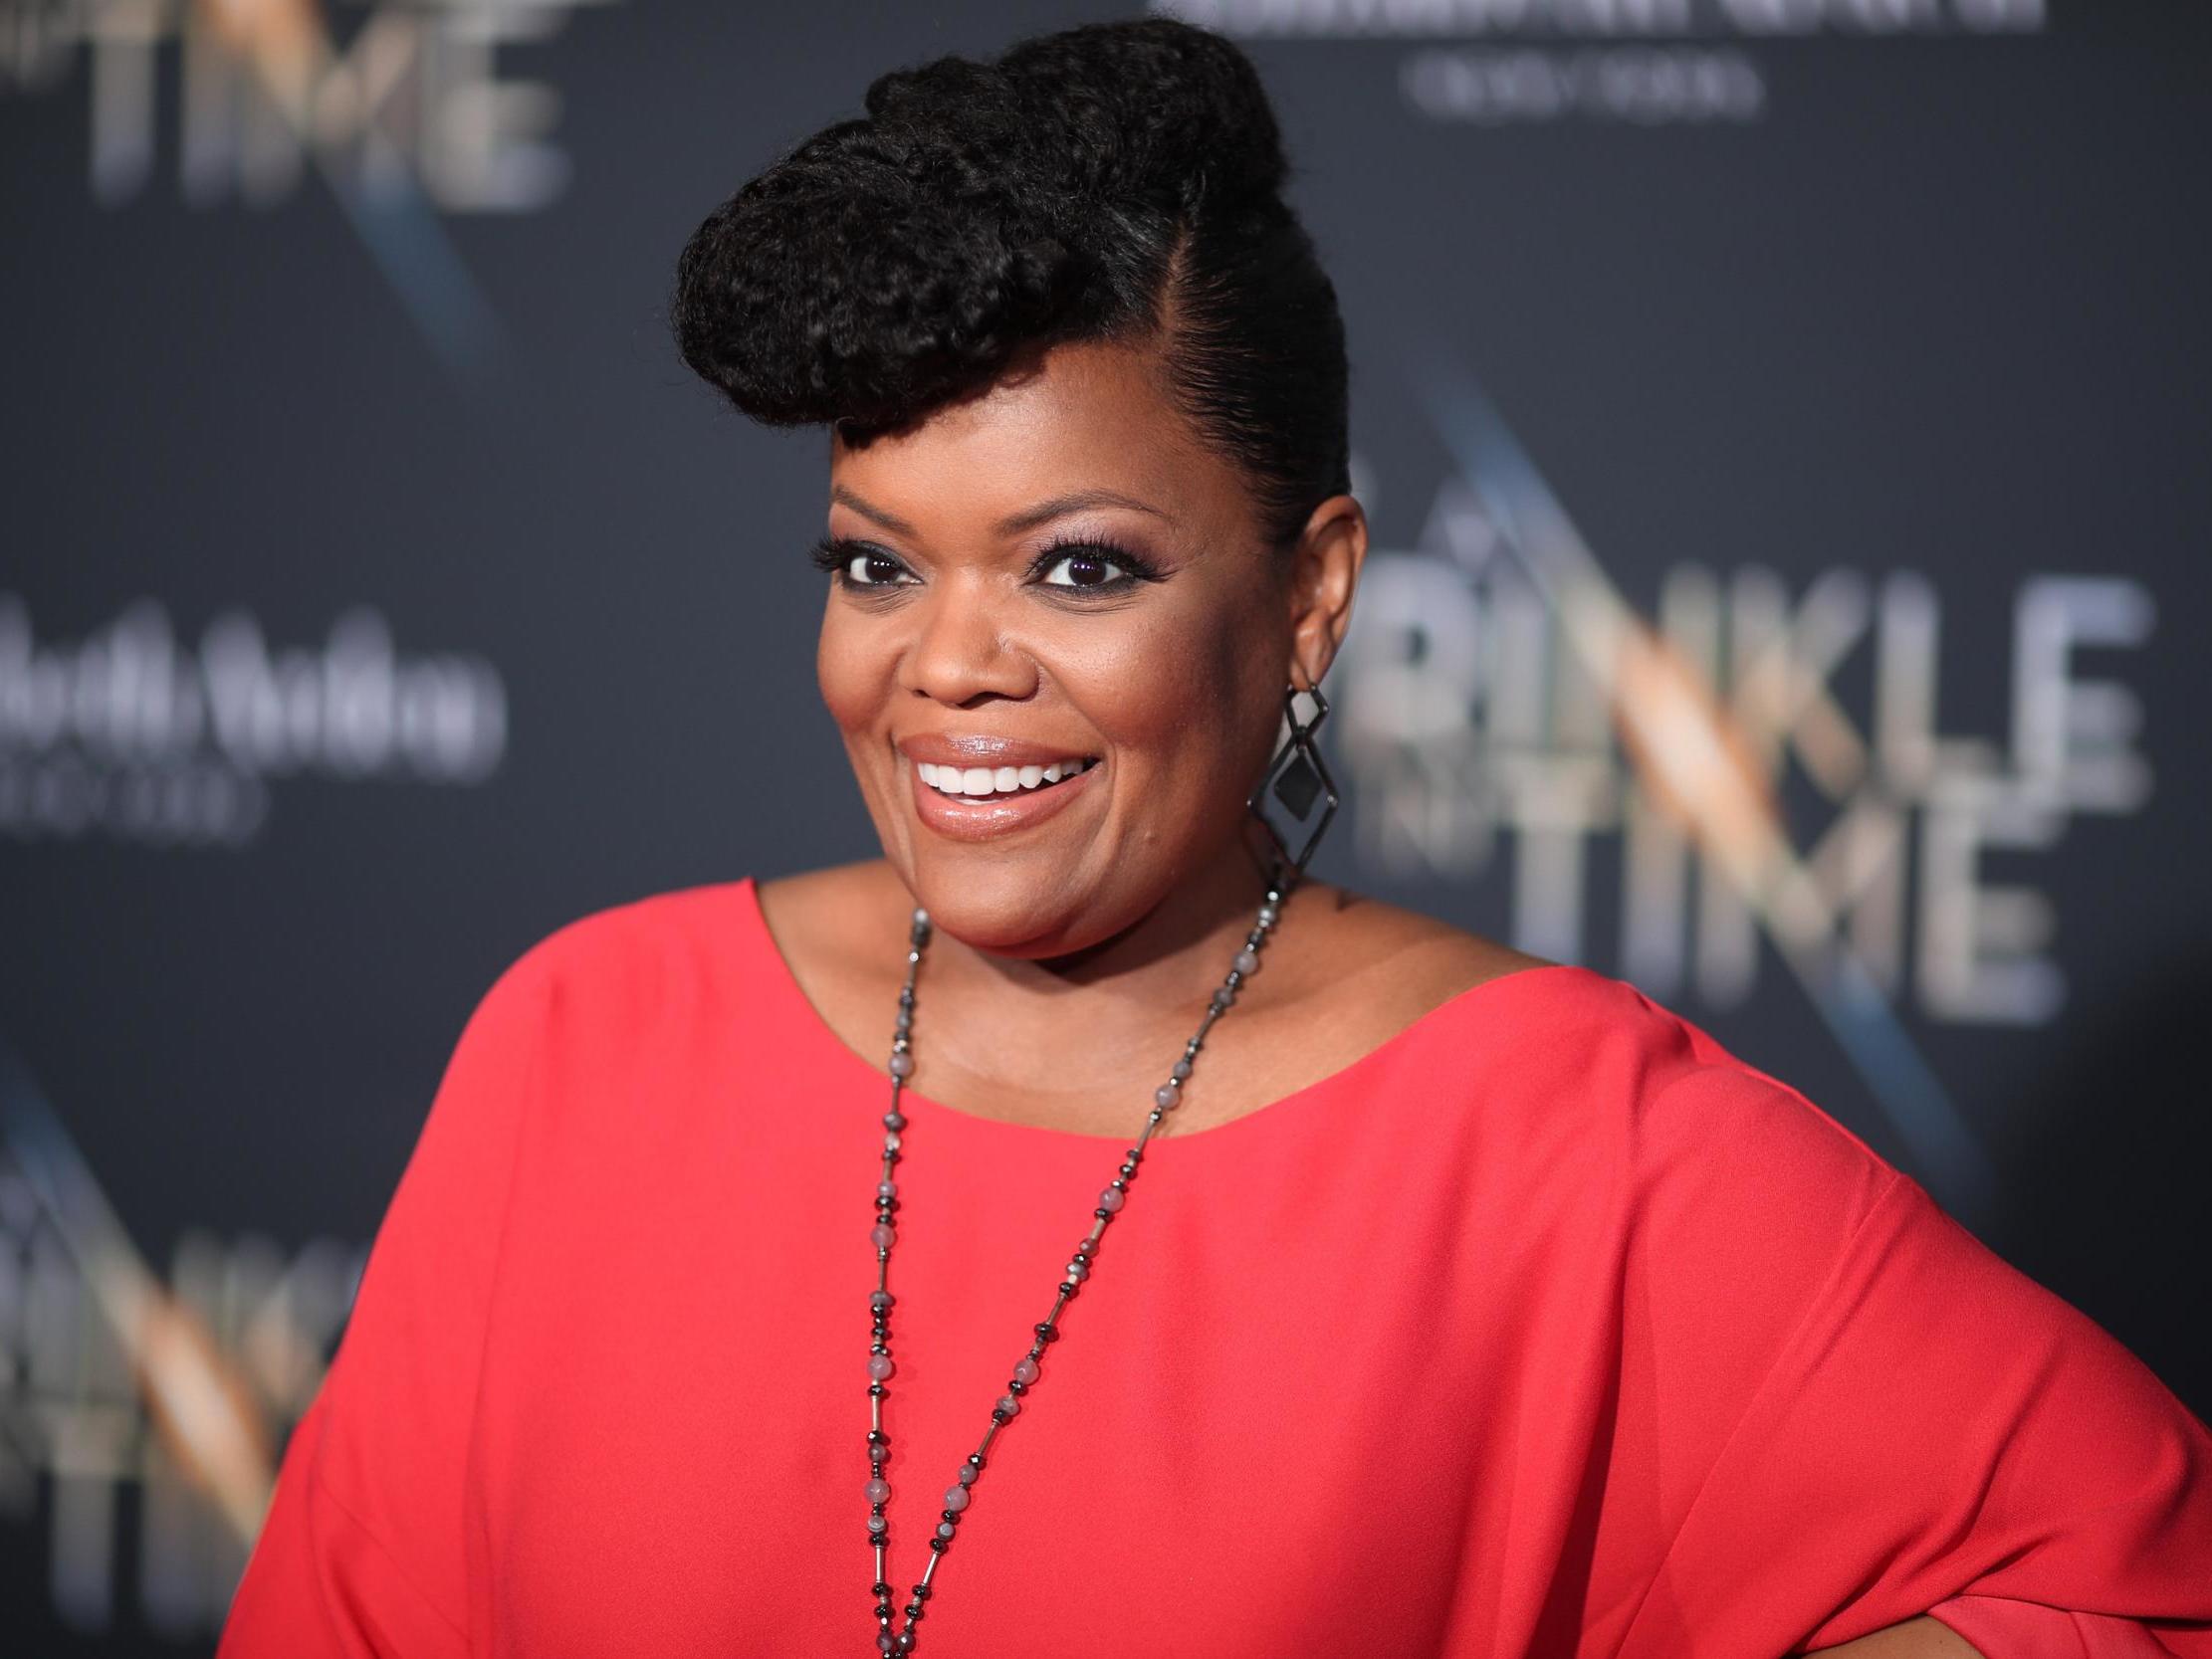 Yvette Nicole Brown wants a stylist who knows how to work with her hair (Getty)